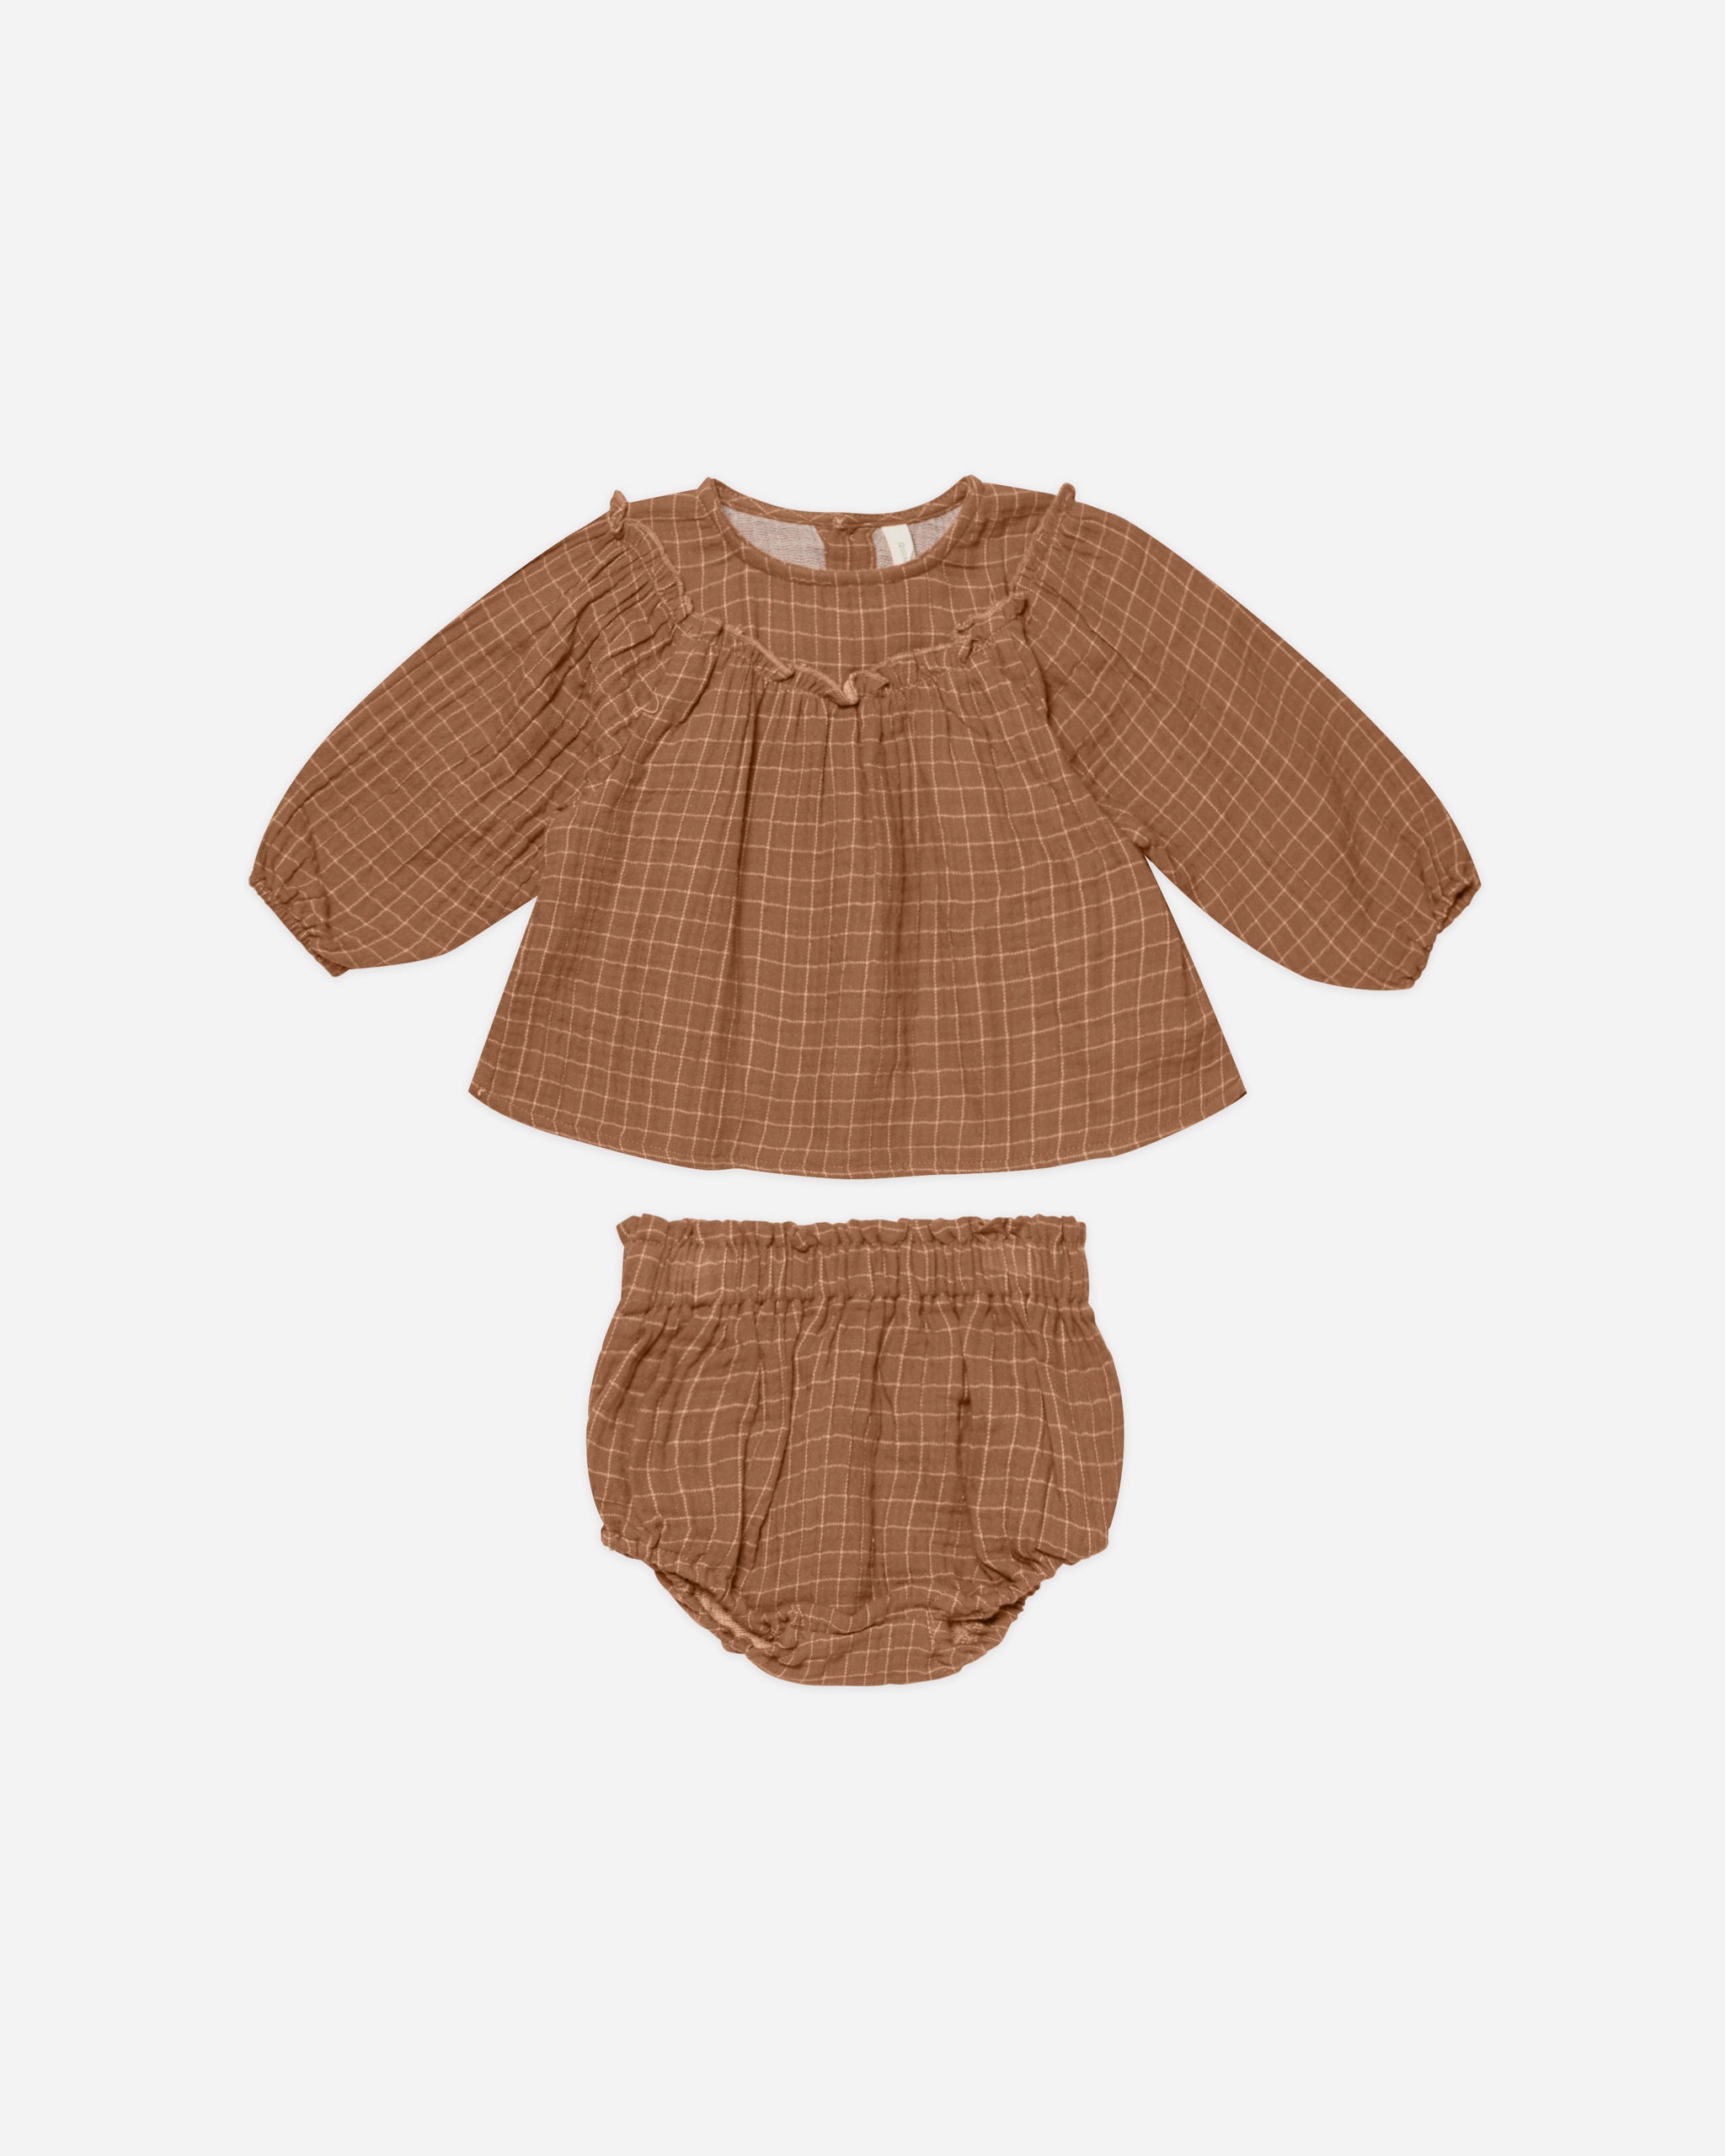 Balloon Sleeve Blouse + Bloomer Set || Cinnamon Grid - Rylee + Cru | Kids Clothes | Trendy Baby Clothes | Modern Infant Outfits |